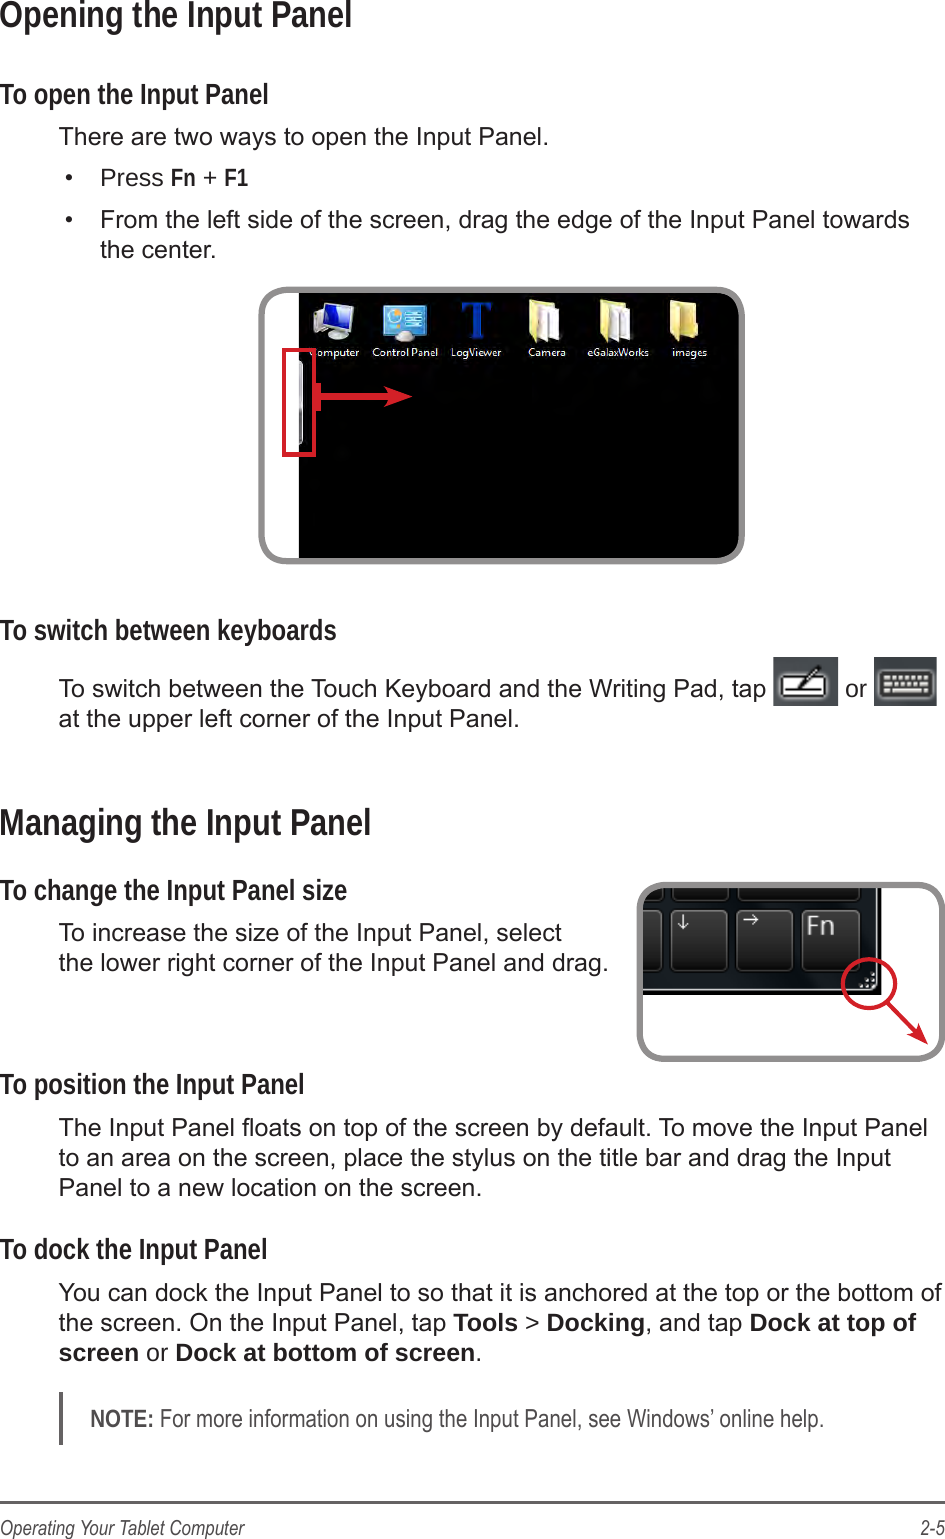 2-5Operating Your Tablet ComputerOpening the Input PanelTo open the Input PanelThere are two ways to open the Input Panel.•  Press Fn + F1•  From the left side of the screen, drag the edge of the Input Panel towards the center.To switch between keyboardsTo switch between the Touch Keyboard and the Writing Pad, tap   or   at the upper left corner of the Input Panel.Managing the Input PanelTo change the Input Panel sizeTo increase the size of the Input Panel, select  the lower right corner of the Input Panel and drag. To position the Input PanelThe Input Panel oats on top of the screen by default. To move the Input Panel to an area on the screen, place the stylus on the title bar and drag the Input Panel to a new location on the screen.To dock the Input PanelYou can dock the Input Panel to so that it is anchored at the top or the bottom of the screen. On the Input Panel, tap Tools &gt; Docking, and tap Dock at top of screen or Dock at bottom of screen.NOTE: For more information on using the Input Panel, see Windows’ online help.